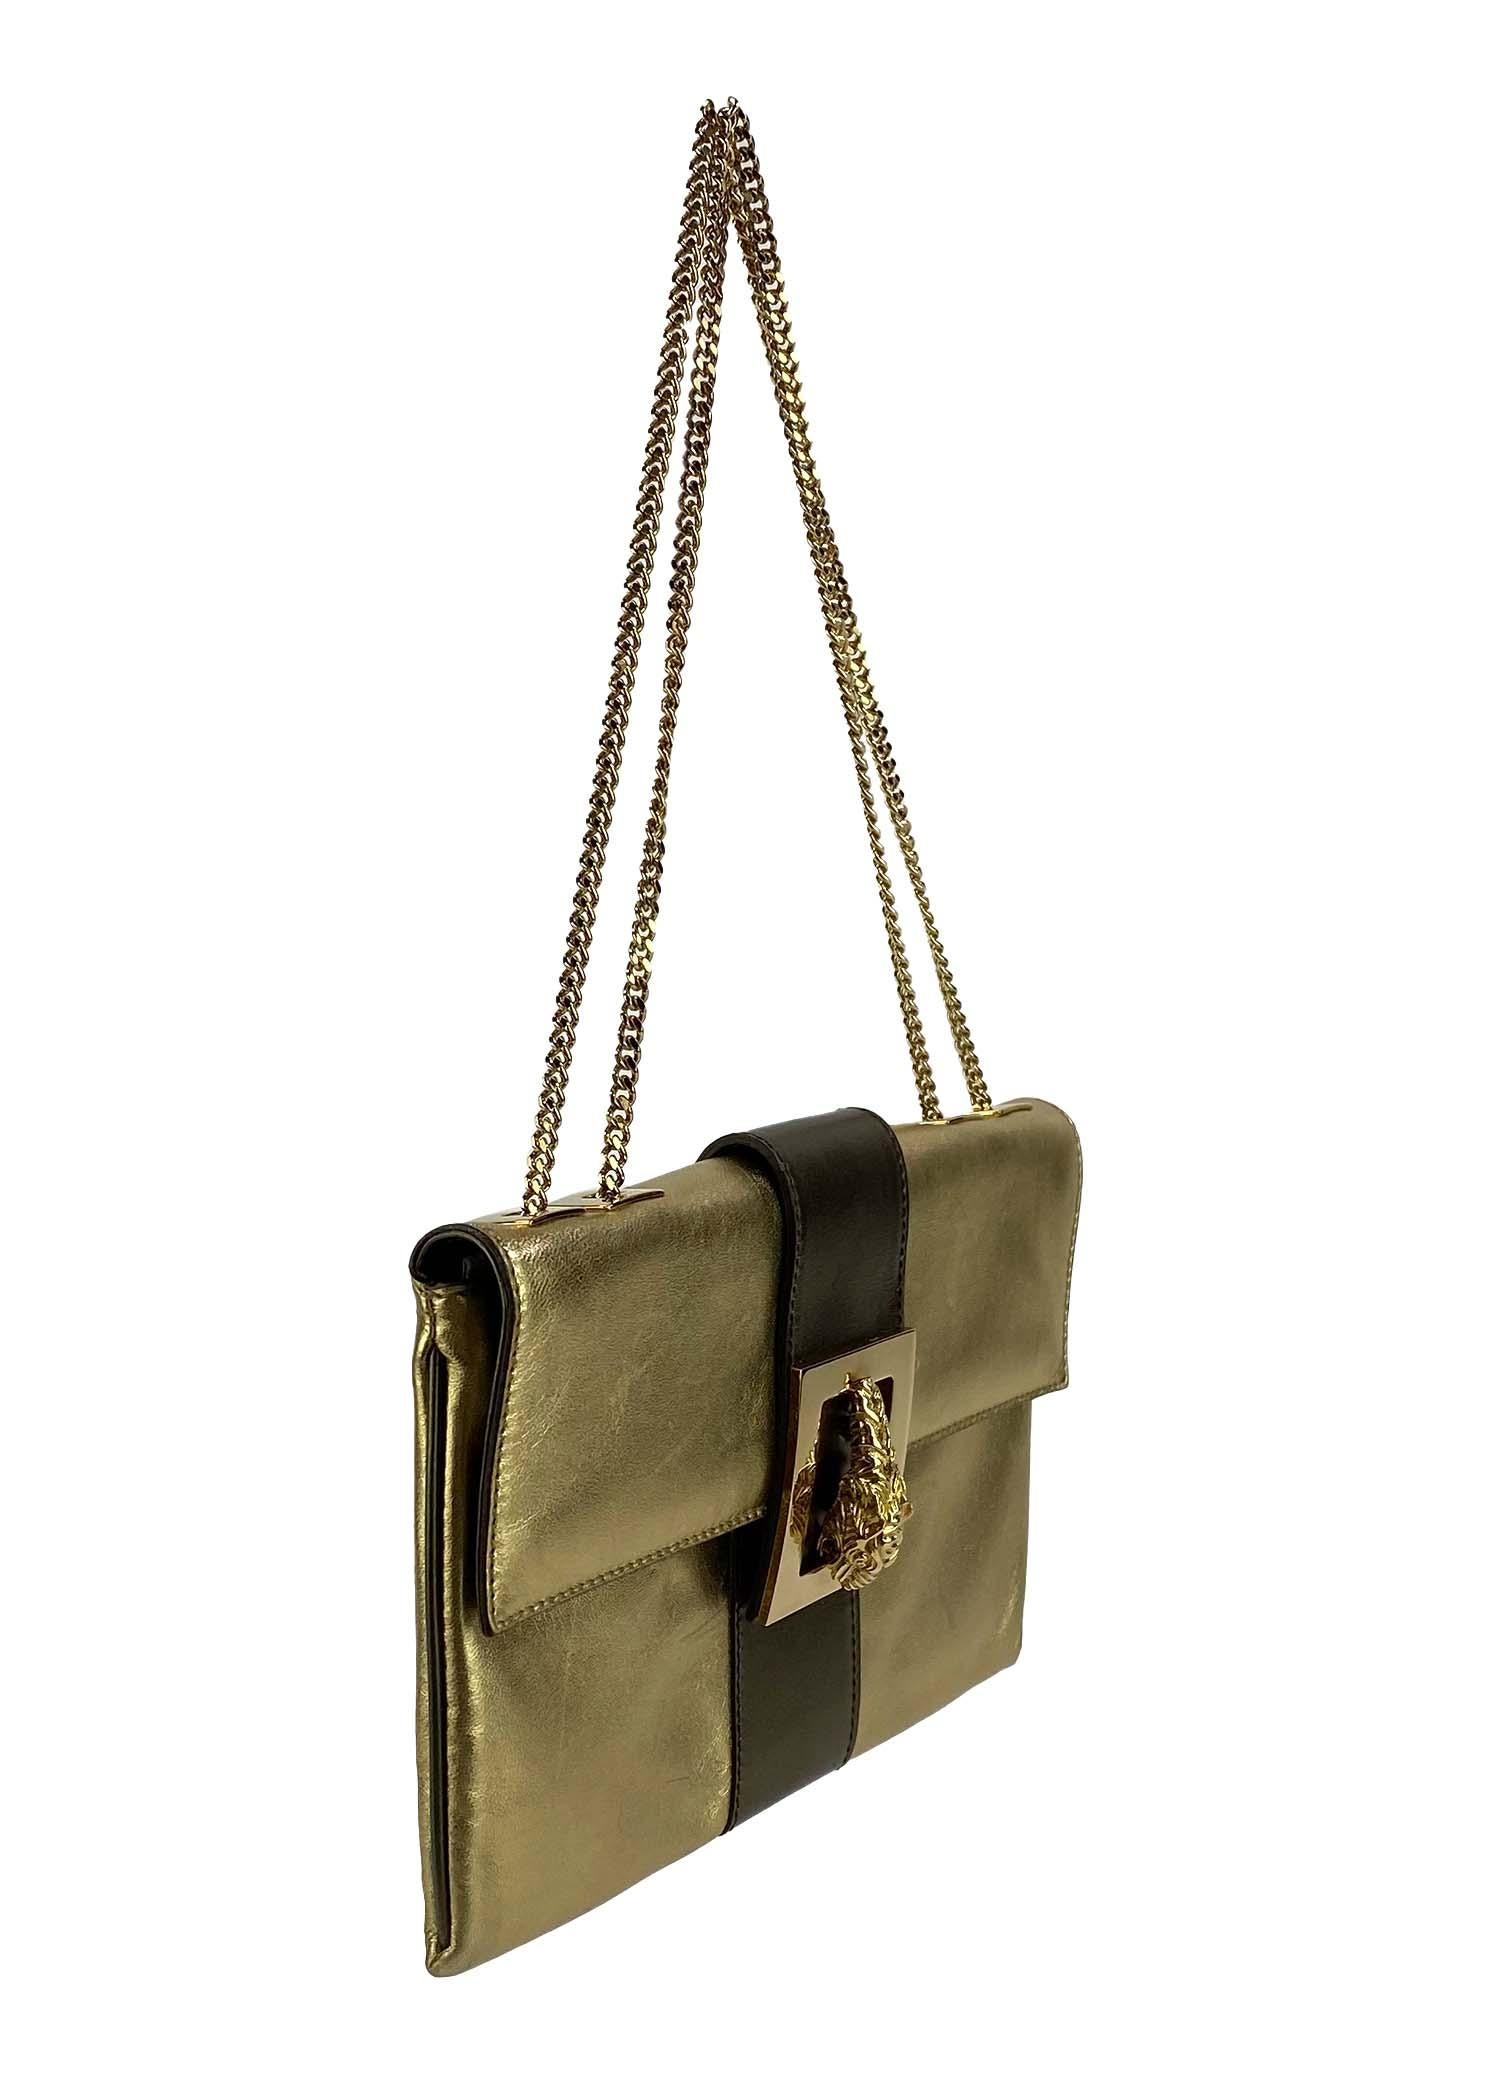 Brown F/W 2000 Gucci by Tom Ford Gold Leather Dionysus Clutch Crossbody Shoulder Bag For Sale